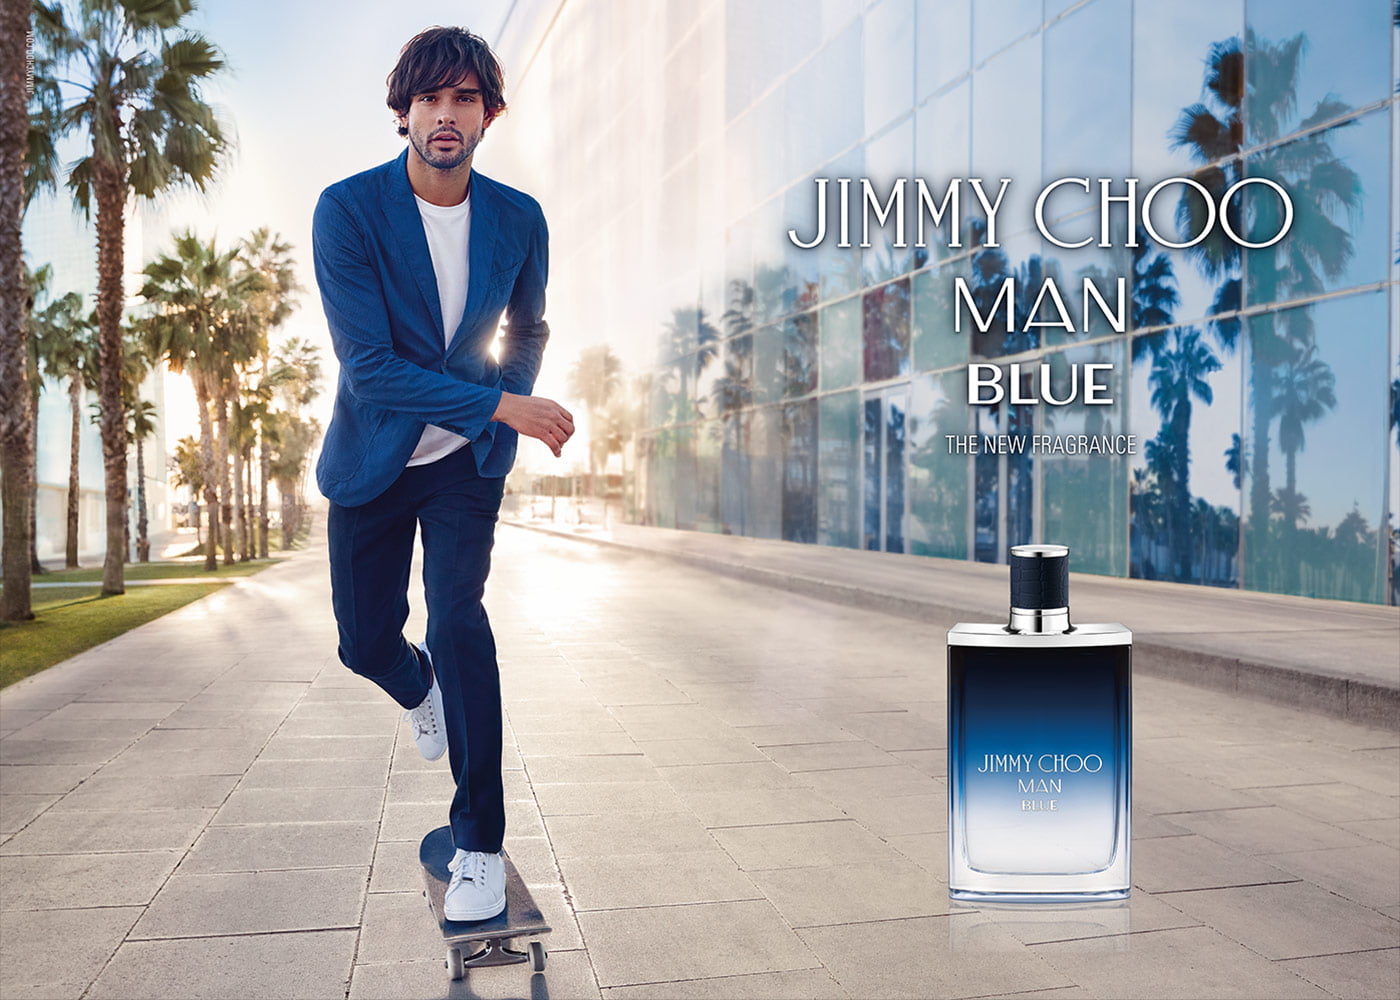 Photo & Video Production services Company in Barcelona, Spain for Jimmy Choo